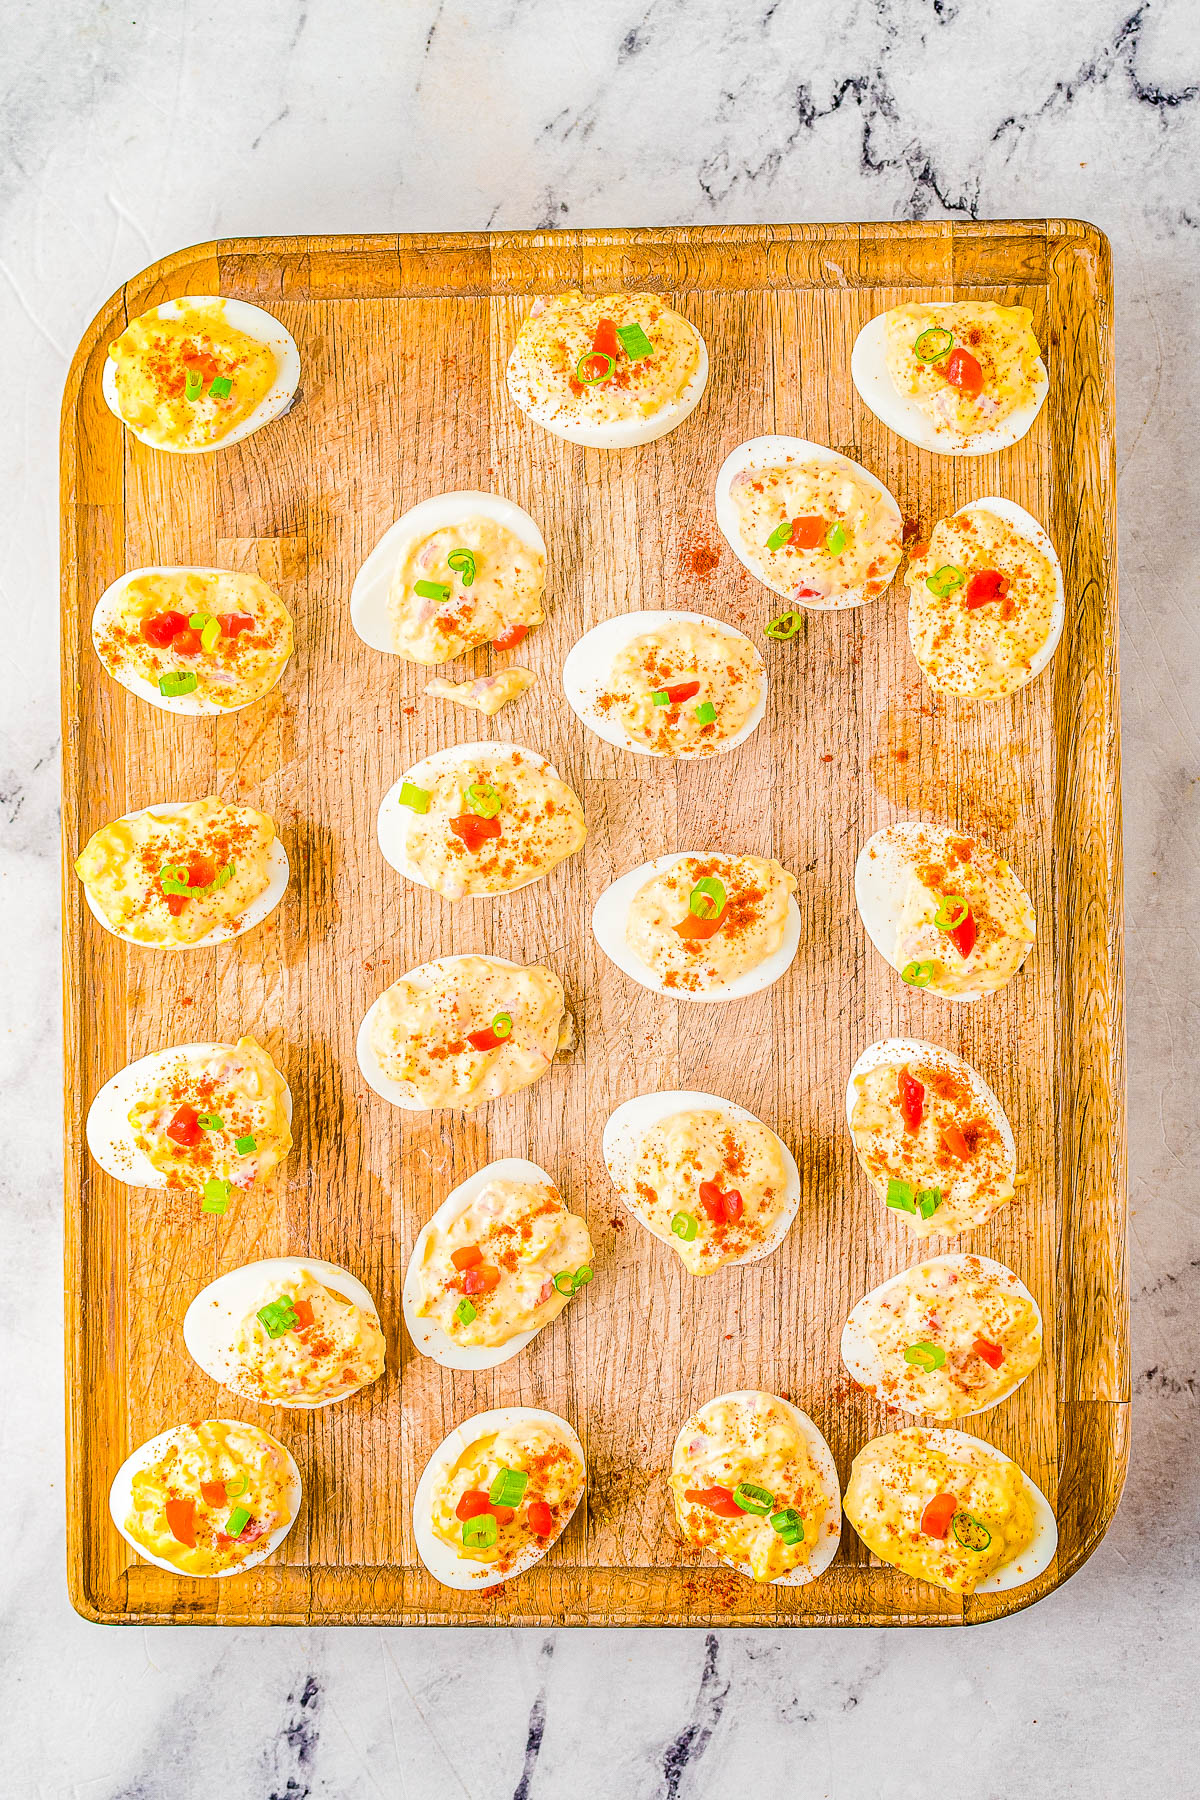 Pimento Cheese Deviled Eggs - A FAST and EASY recipe for the BEST deviled eggs because they're creamy, cheesy, and spiked with pimentos! Whether you're making them for a holiday party, game day or tailgating event, these are sure to be a crowd FAVORITE!